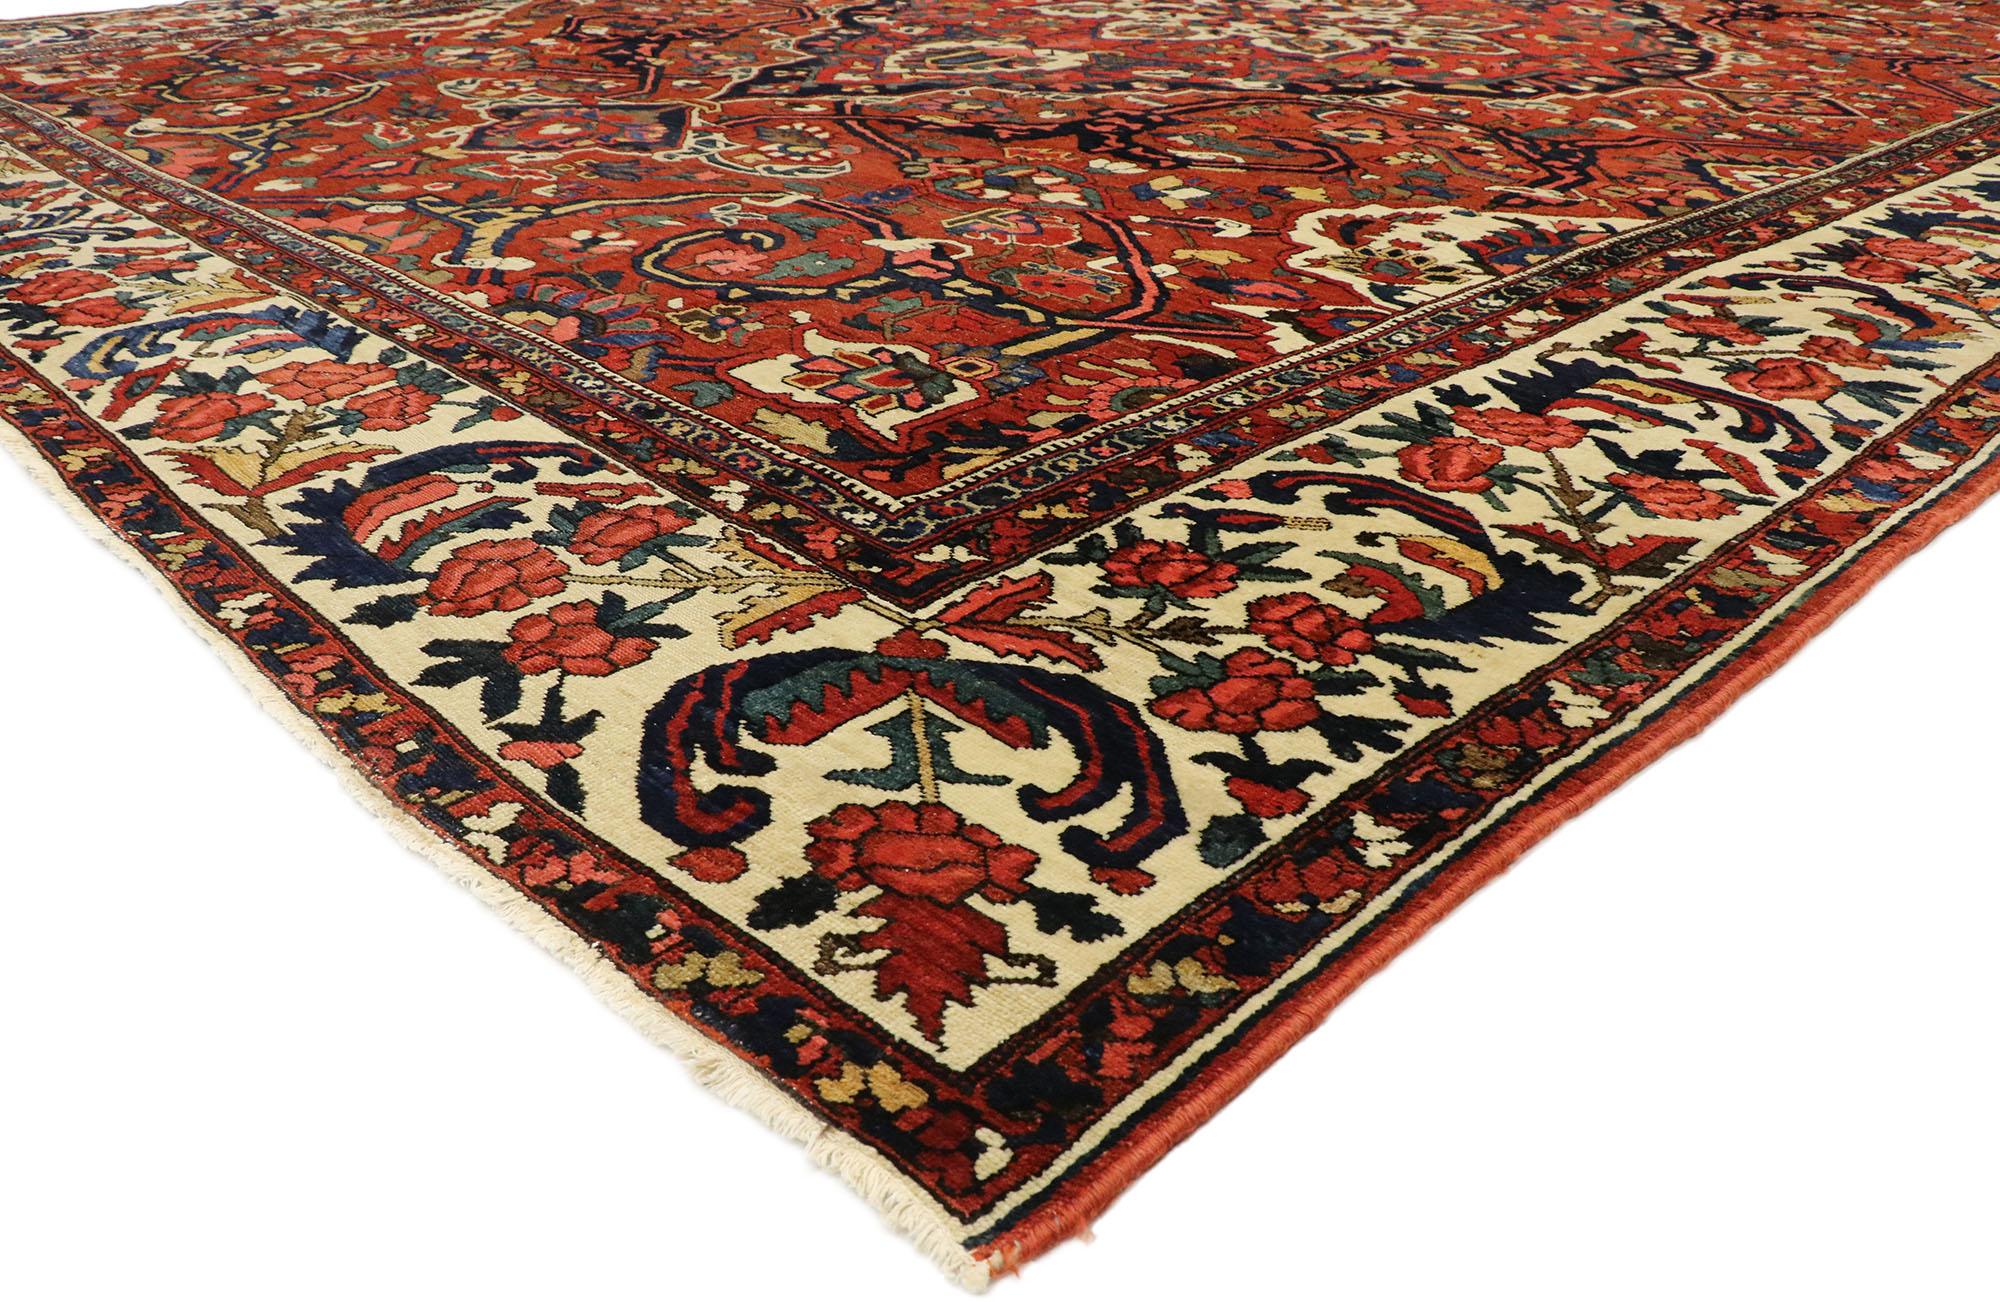 76757 Antique Persian Bakhtiari Rug, 13'02 x 17'04.

Immerse yourself in the regal heritage of the Bakhtiari tribespeople from the rugged Zagros Mountains, as classic elegance seamlessly converges with the sophistication reminiscent of Ivy League